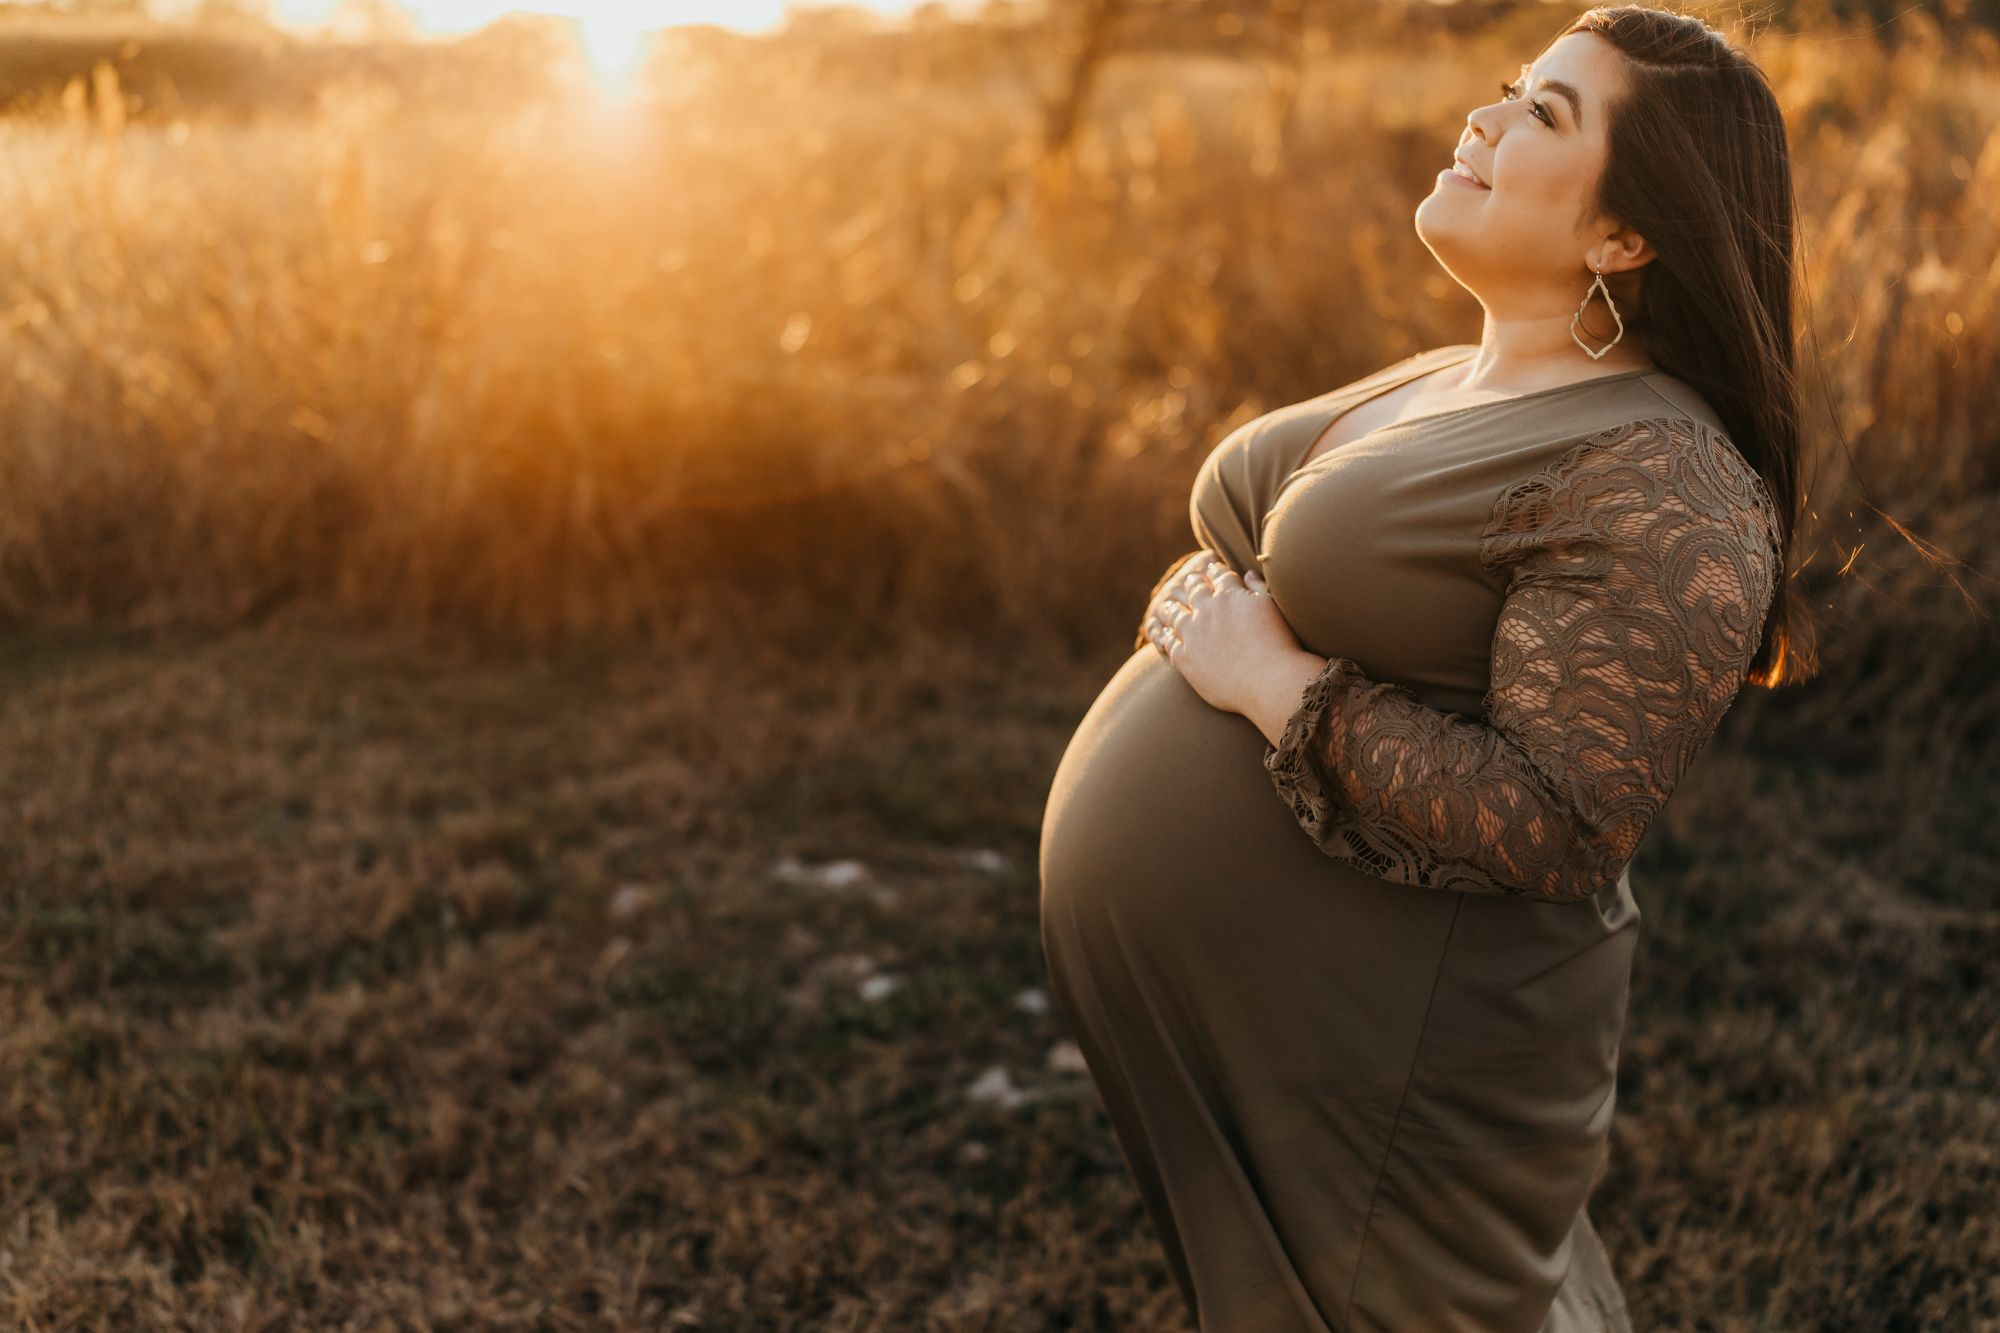 pregnant mama holding her belly in a field, during golden hour, wearing an olive dress.